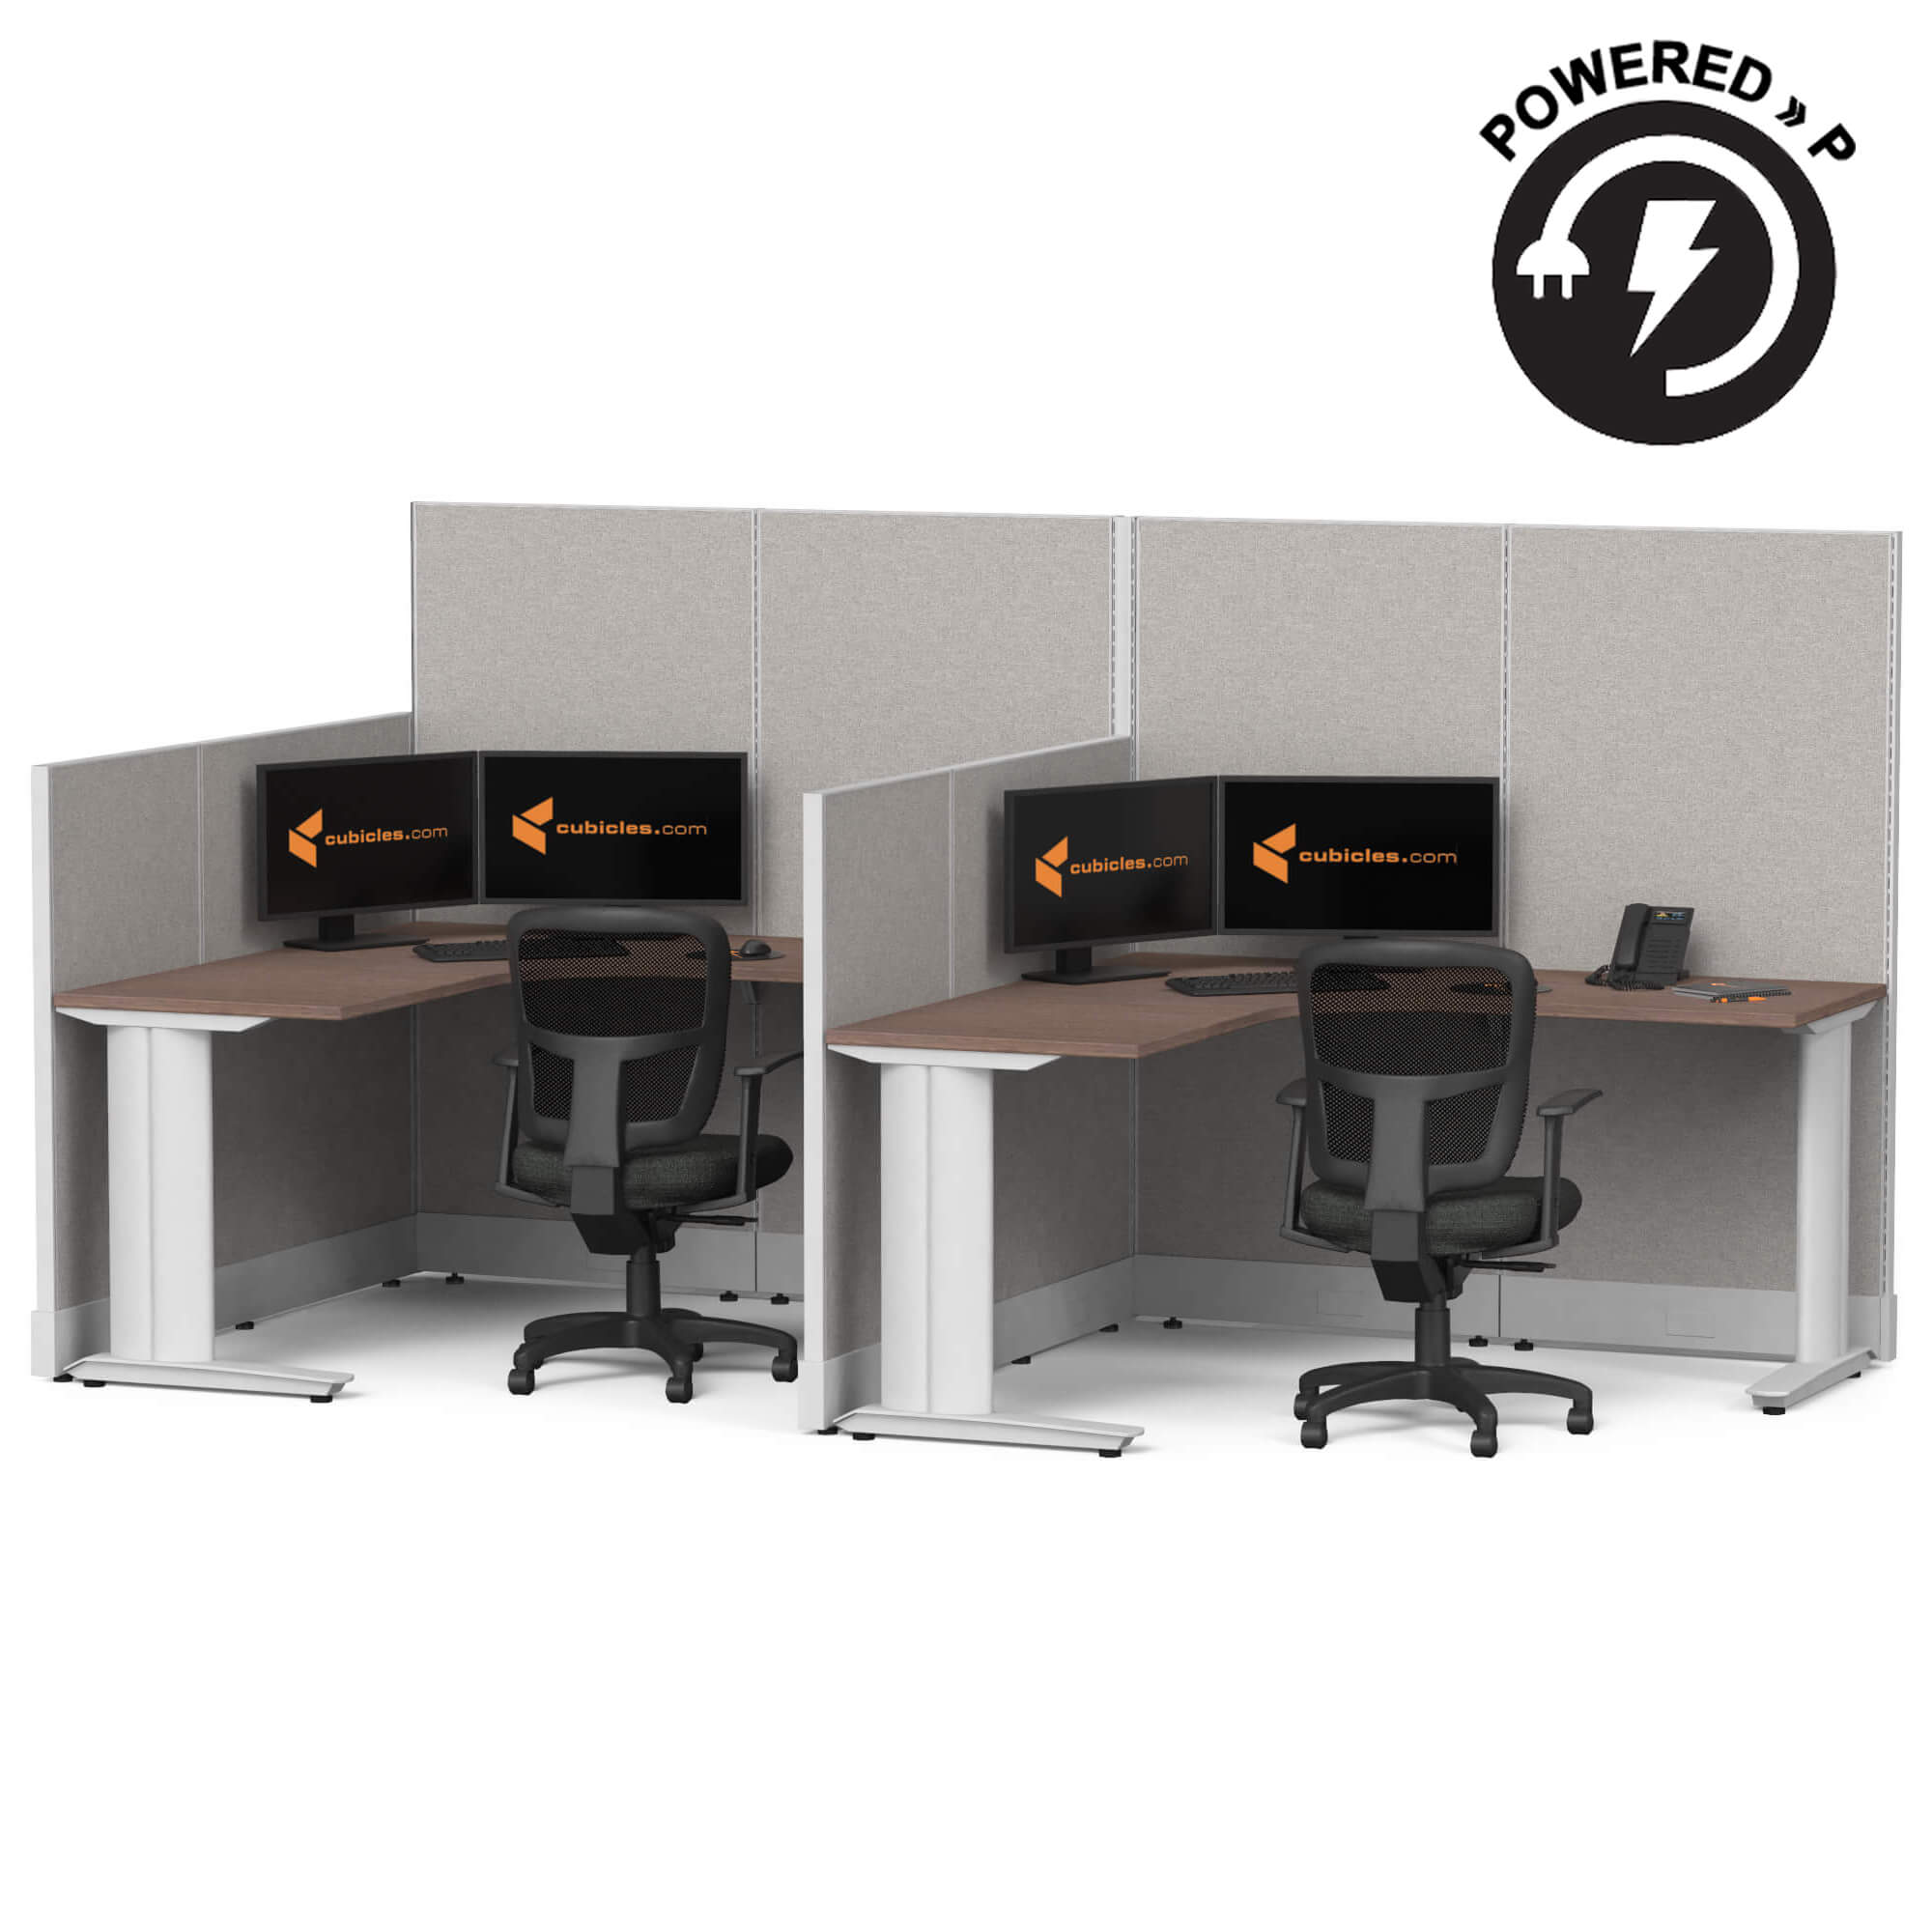 Cubicle desk l shaped 2pack powered